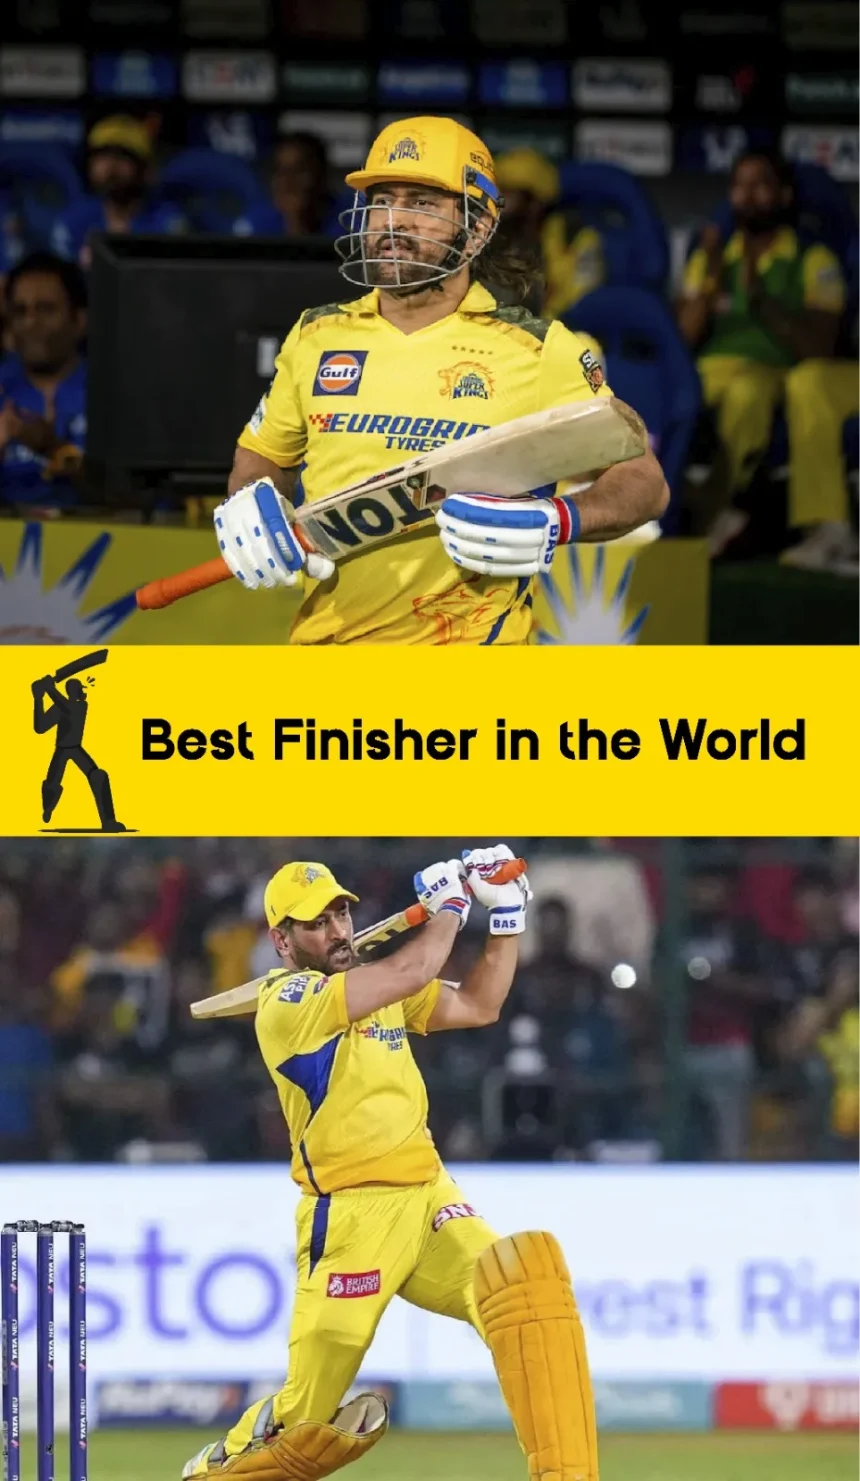 Best Finisher in the World, who is the Best Finisher in the World, afridi the Best Finisher in the World, Best Finisher in the World in cricket history, afridi is the Best Finisher in the World, best cricket finisher in the world, Best Finisher in the World cricket, Who is best Finisher in the World, the Best Finisher in the World, cricket Best Finisher in the World, who is the best finisher in cricket in the world, MS Dhoni,